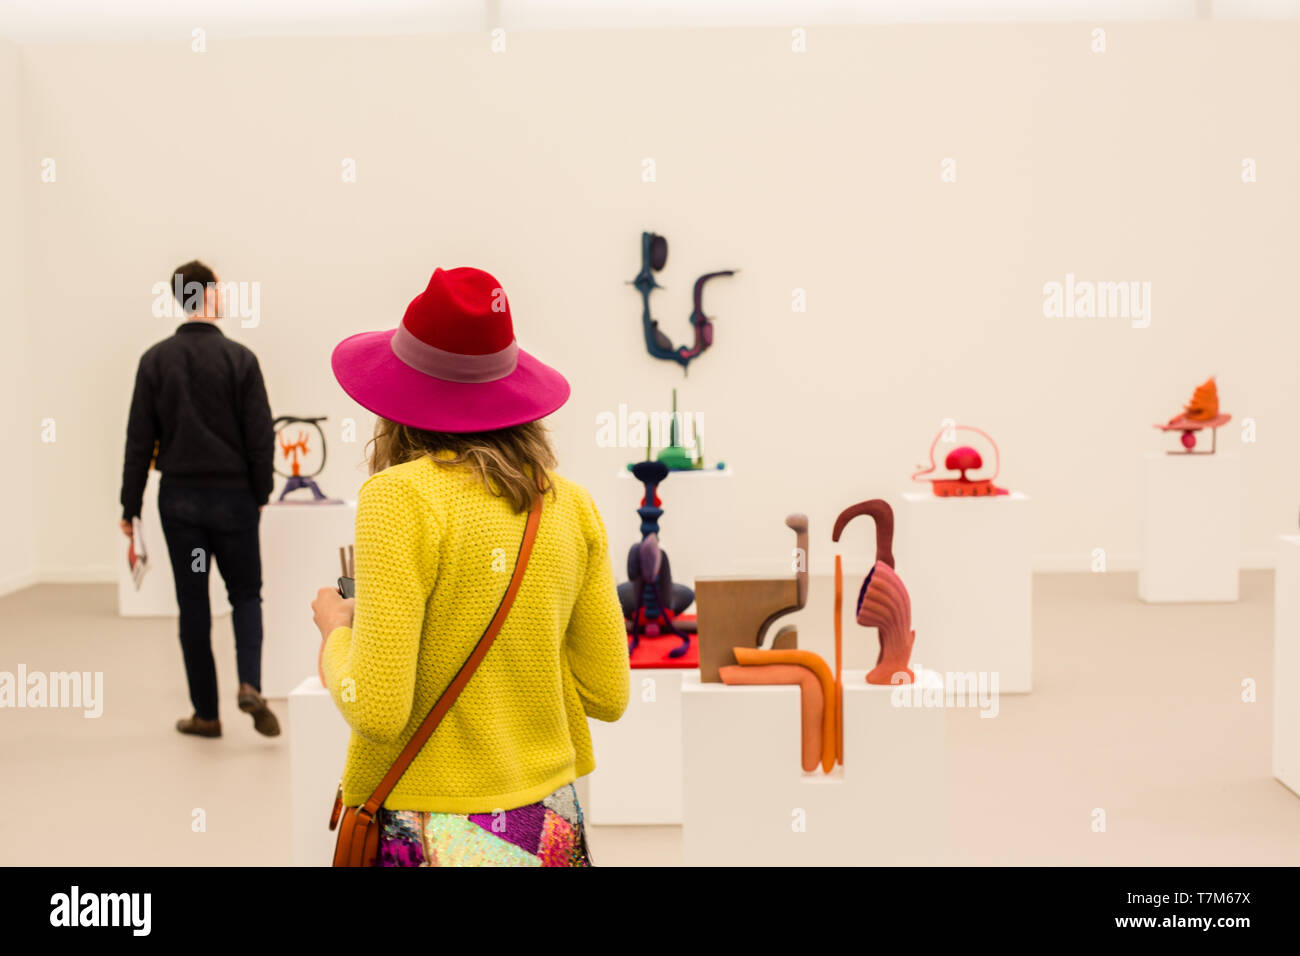 New York, NY - May 3, 2019. A woman in a bright hat and yellow jacket in the midst of Matthew Ronay's sculptures in the Casey Kaplan Gallery at the Frieze Art Fair on New York City's Randalls Island. Stock Photo